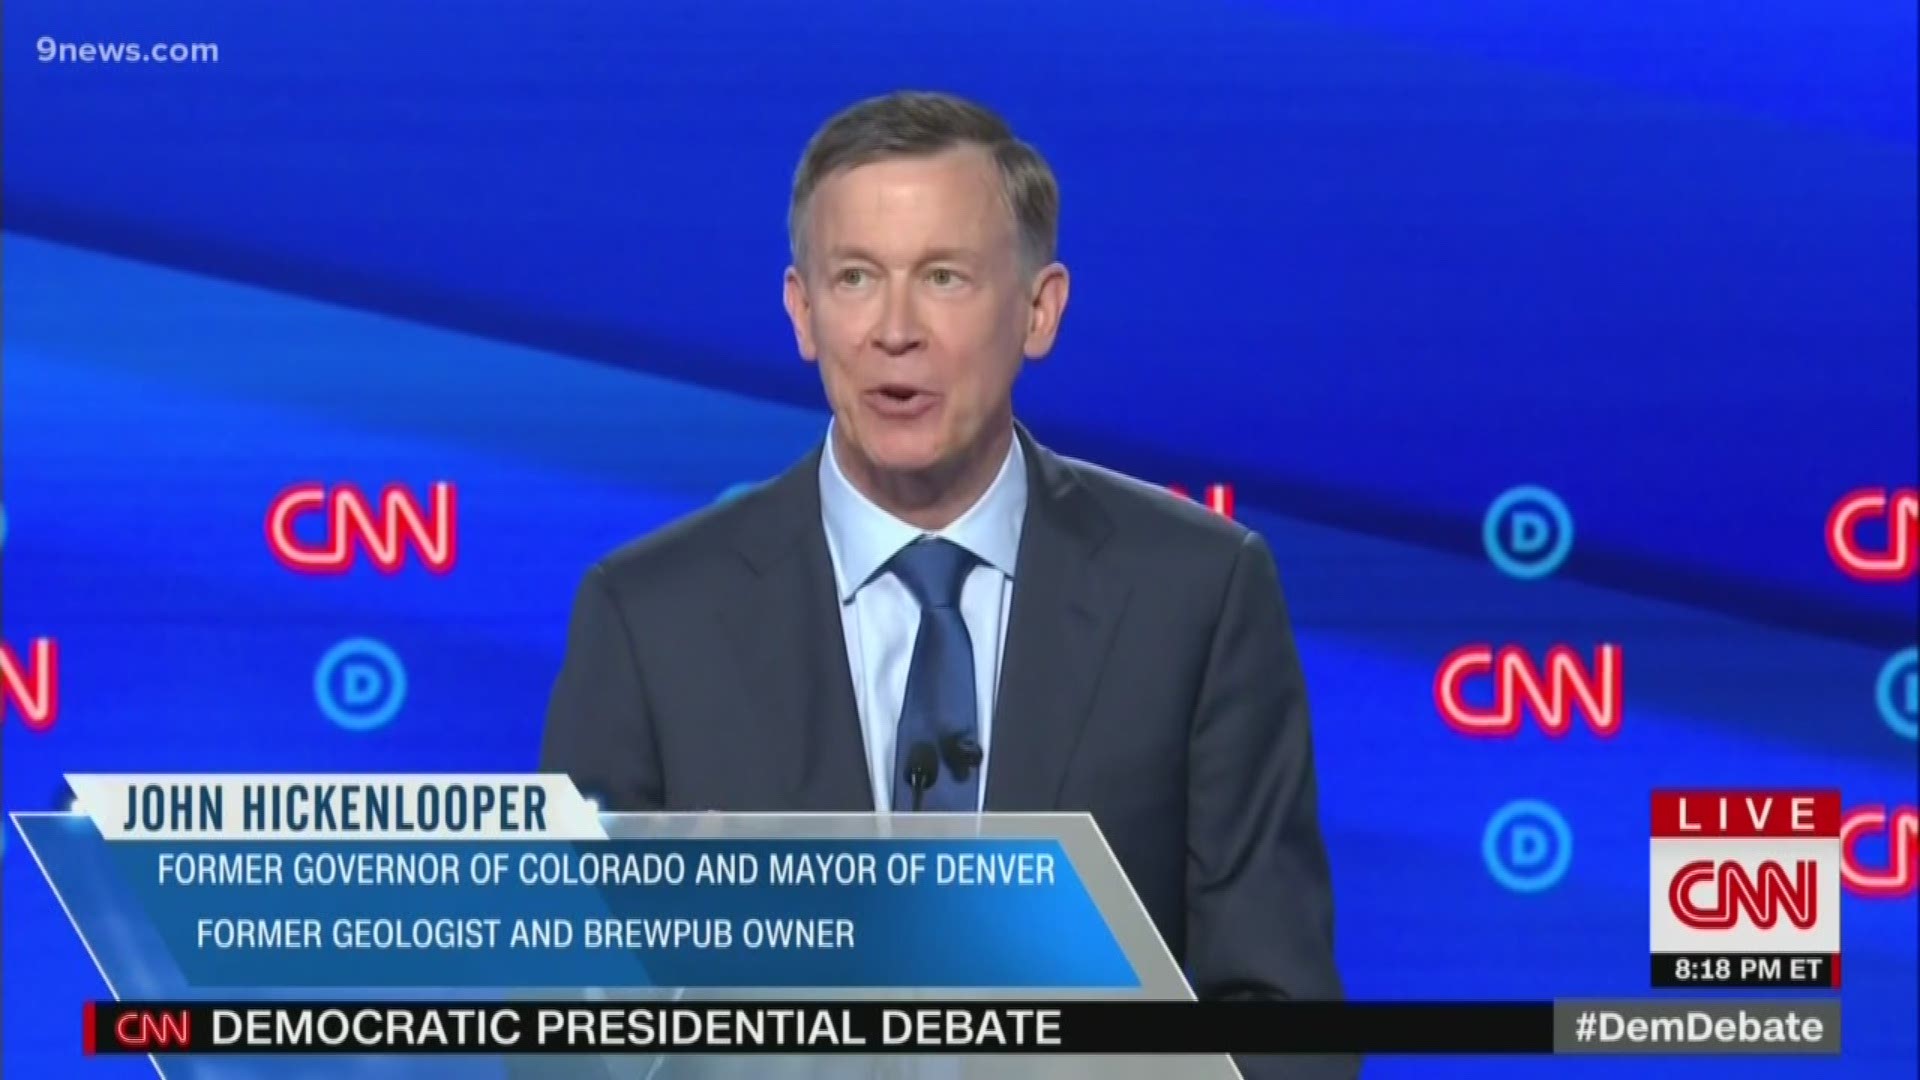 Former Governor John Hickenlooper needed to stand out in tonight's second Democratic Presidential Debate. But the moment he might be most remembered for is starting the wave with Senator Bernie Sanders.